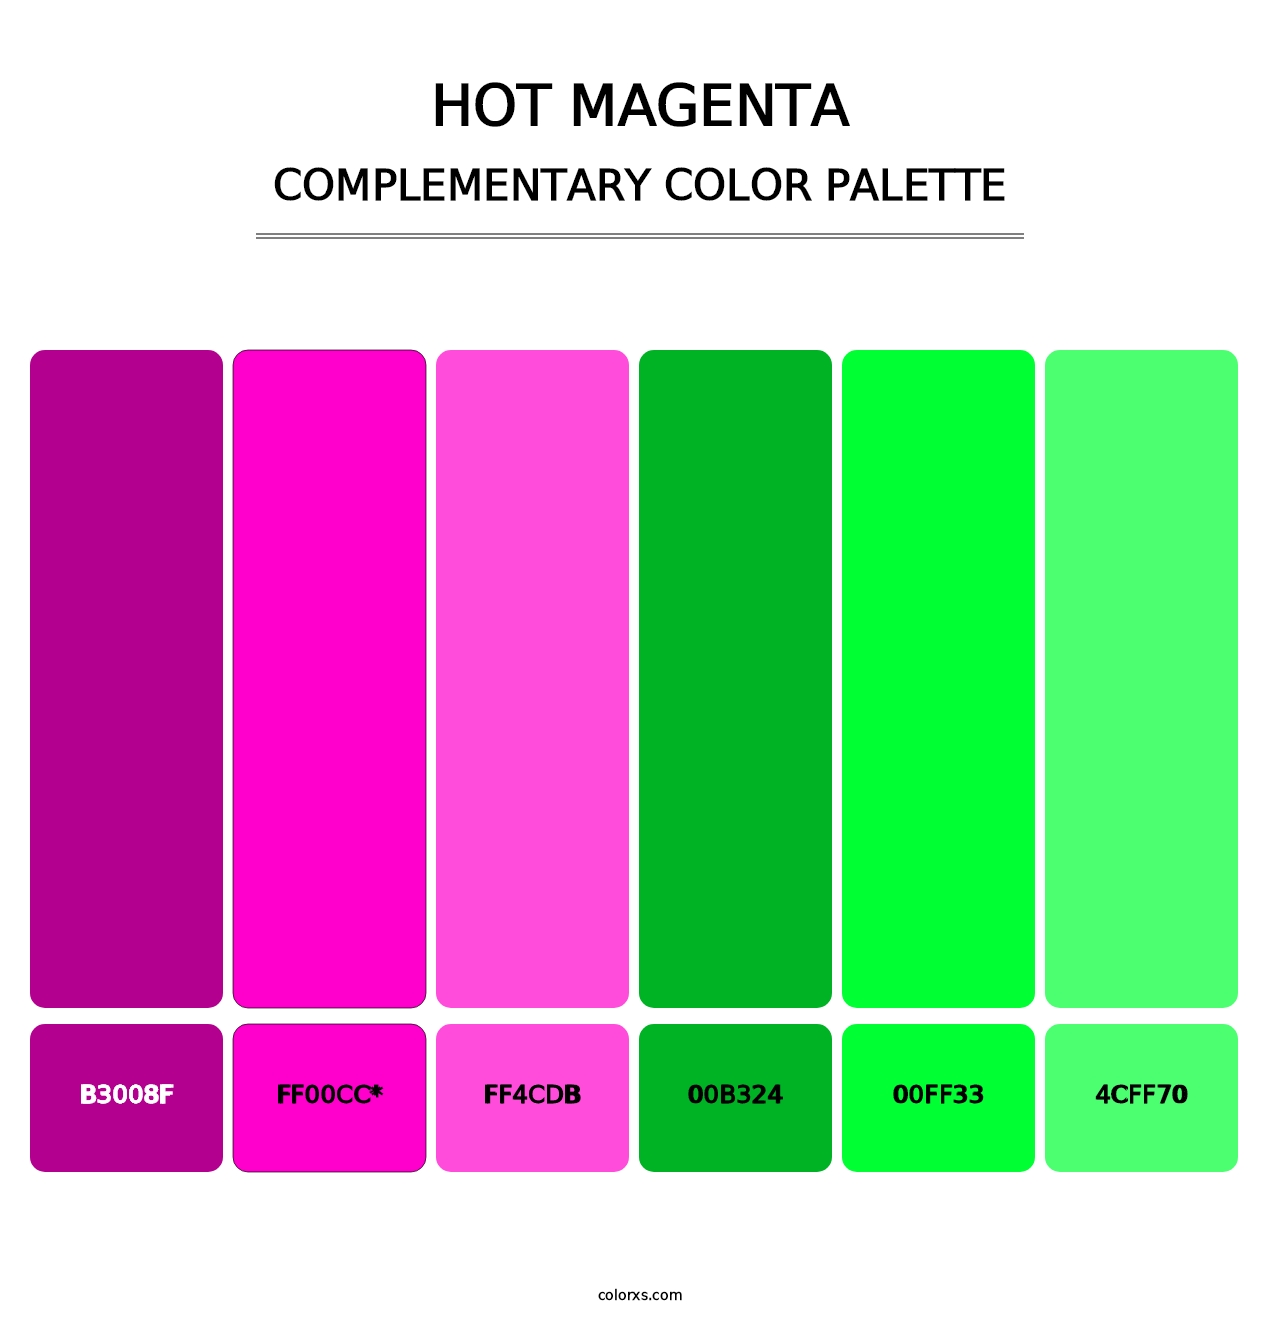 Hot Magenta - Complementary Color Palette